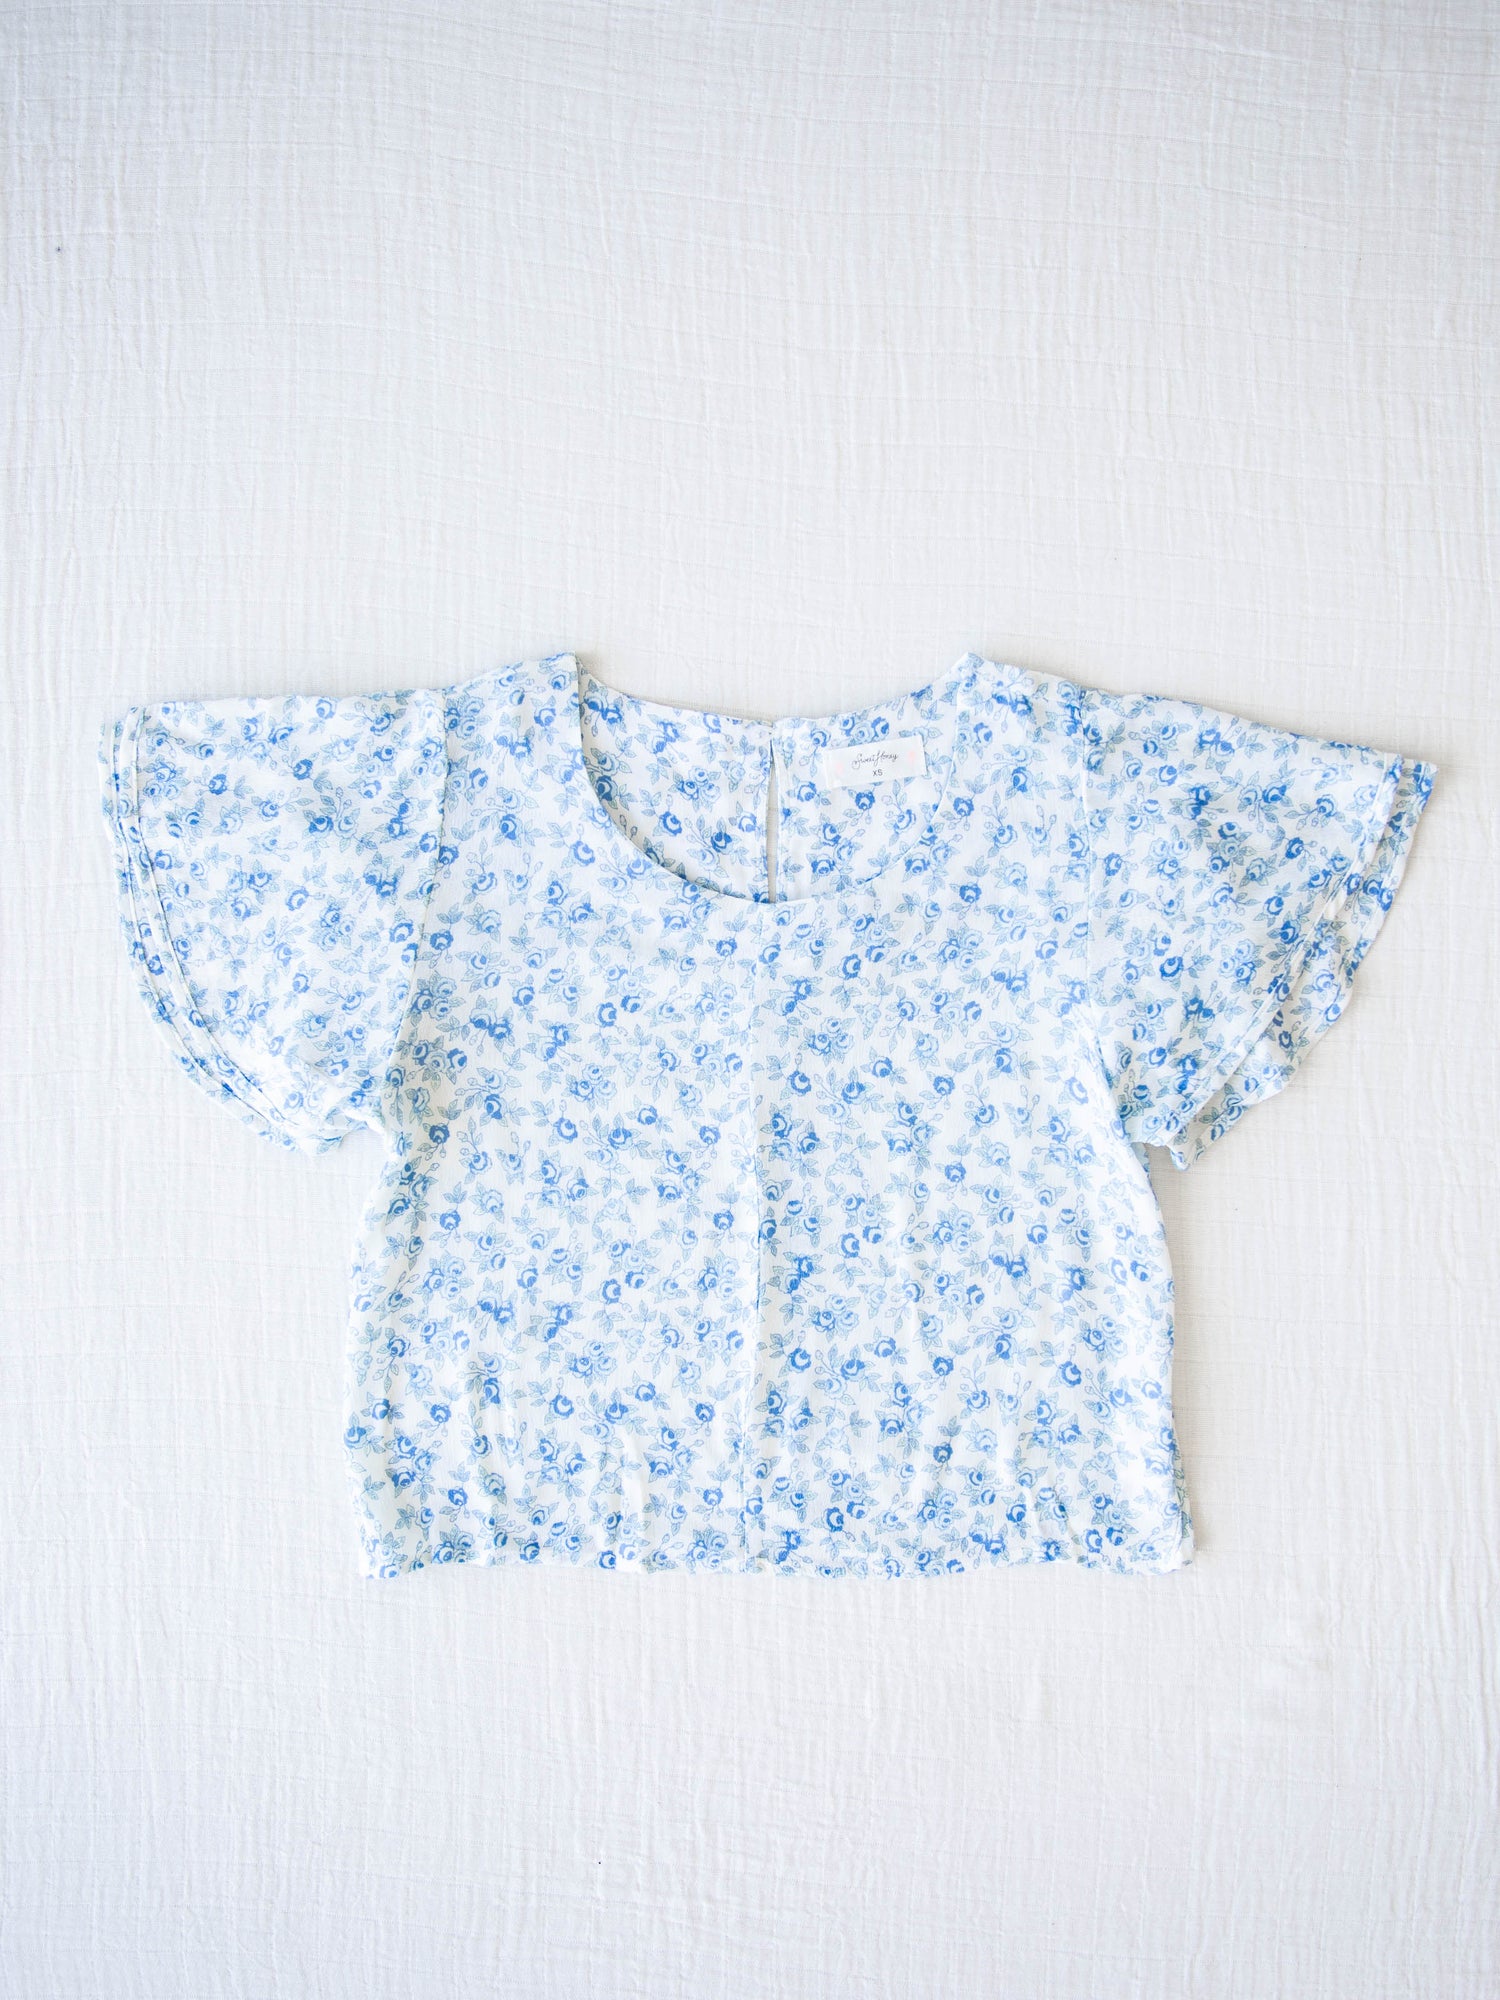 Classic Flutter Top - Blue Jay Floral. This top has a keyhole back and flowy double ruffle sleeves. It is a blue rose pattern on a pale background.